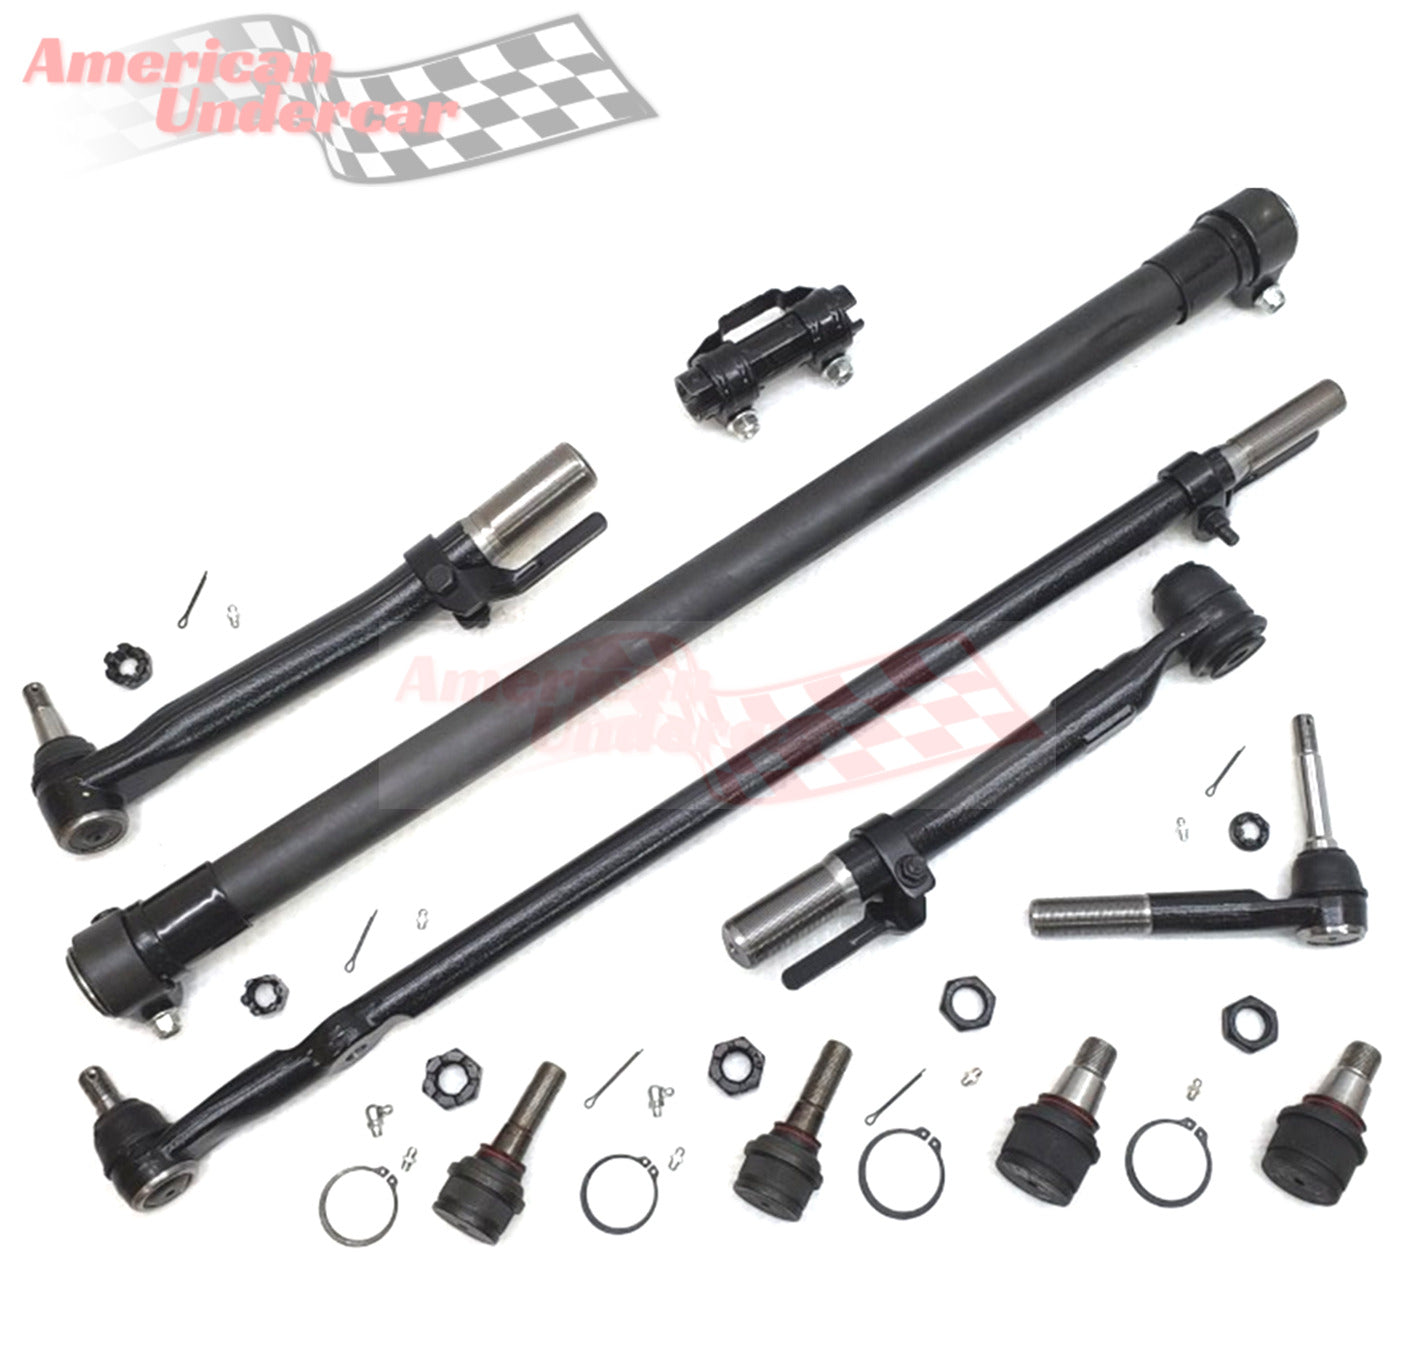 XRF Ford F350 Super Duty WIDE AXLE Steering and Suspension Kit 2017 - 2022 4x4